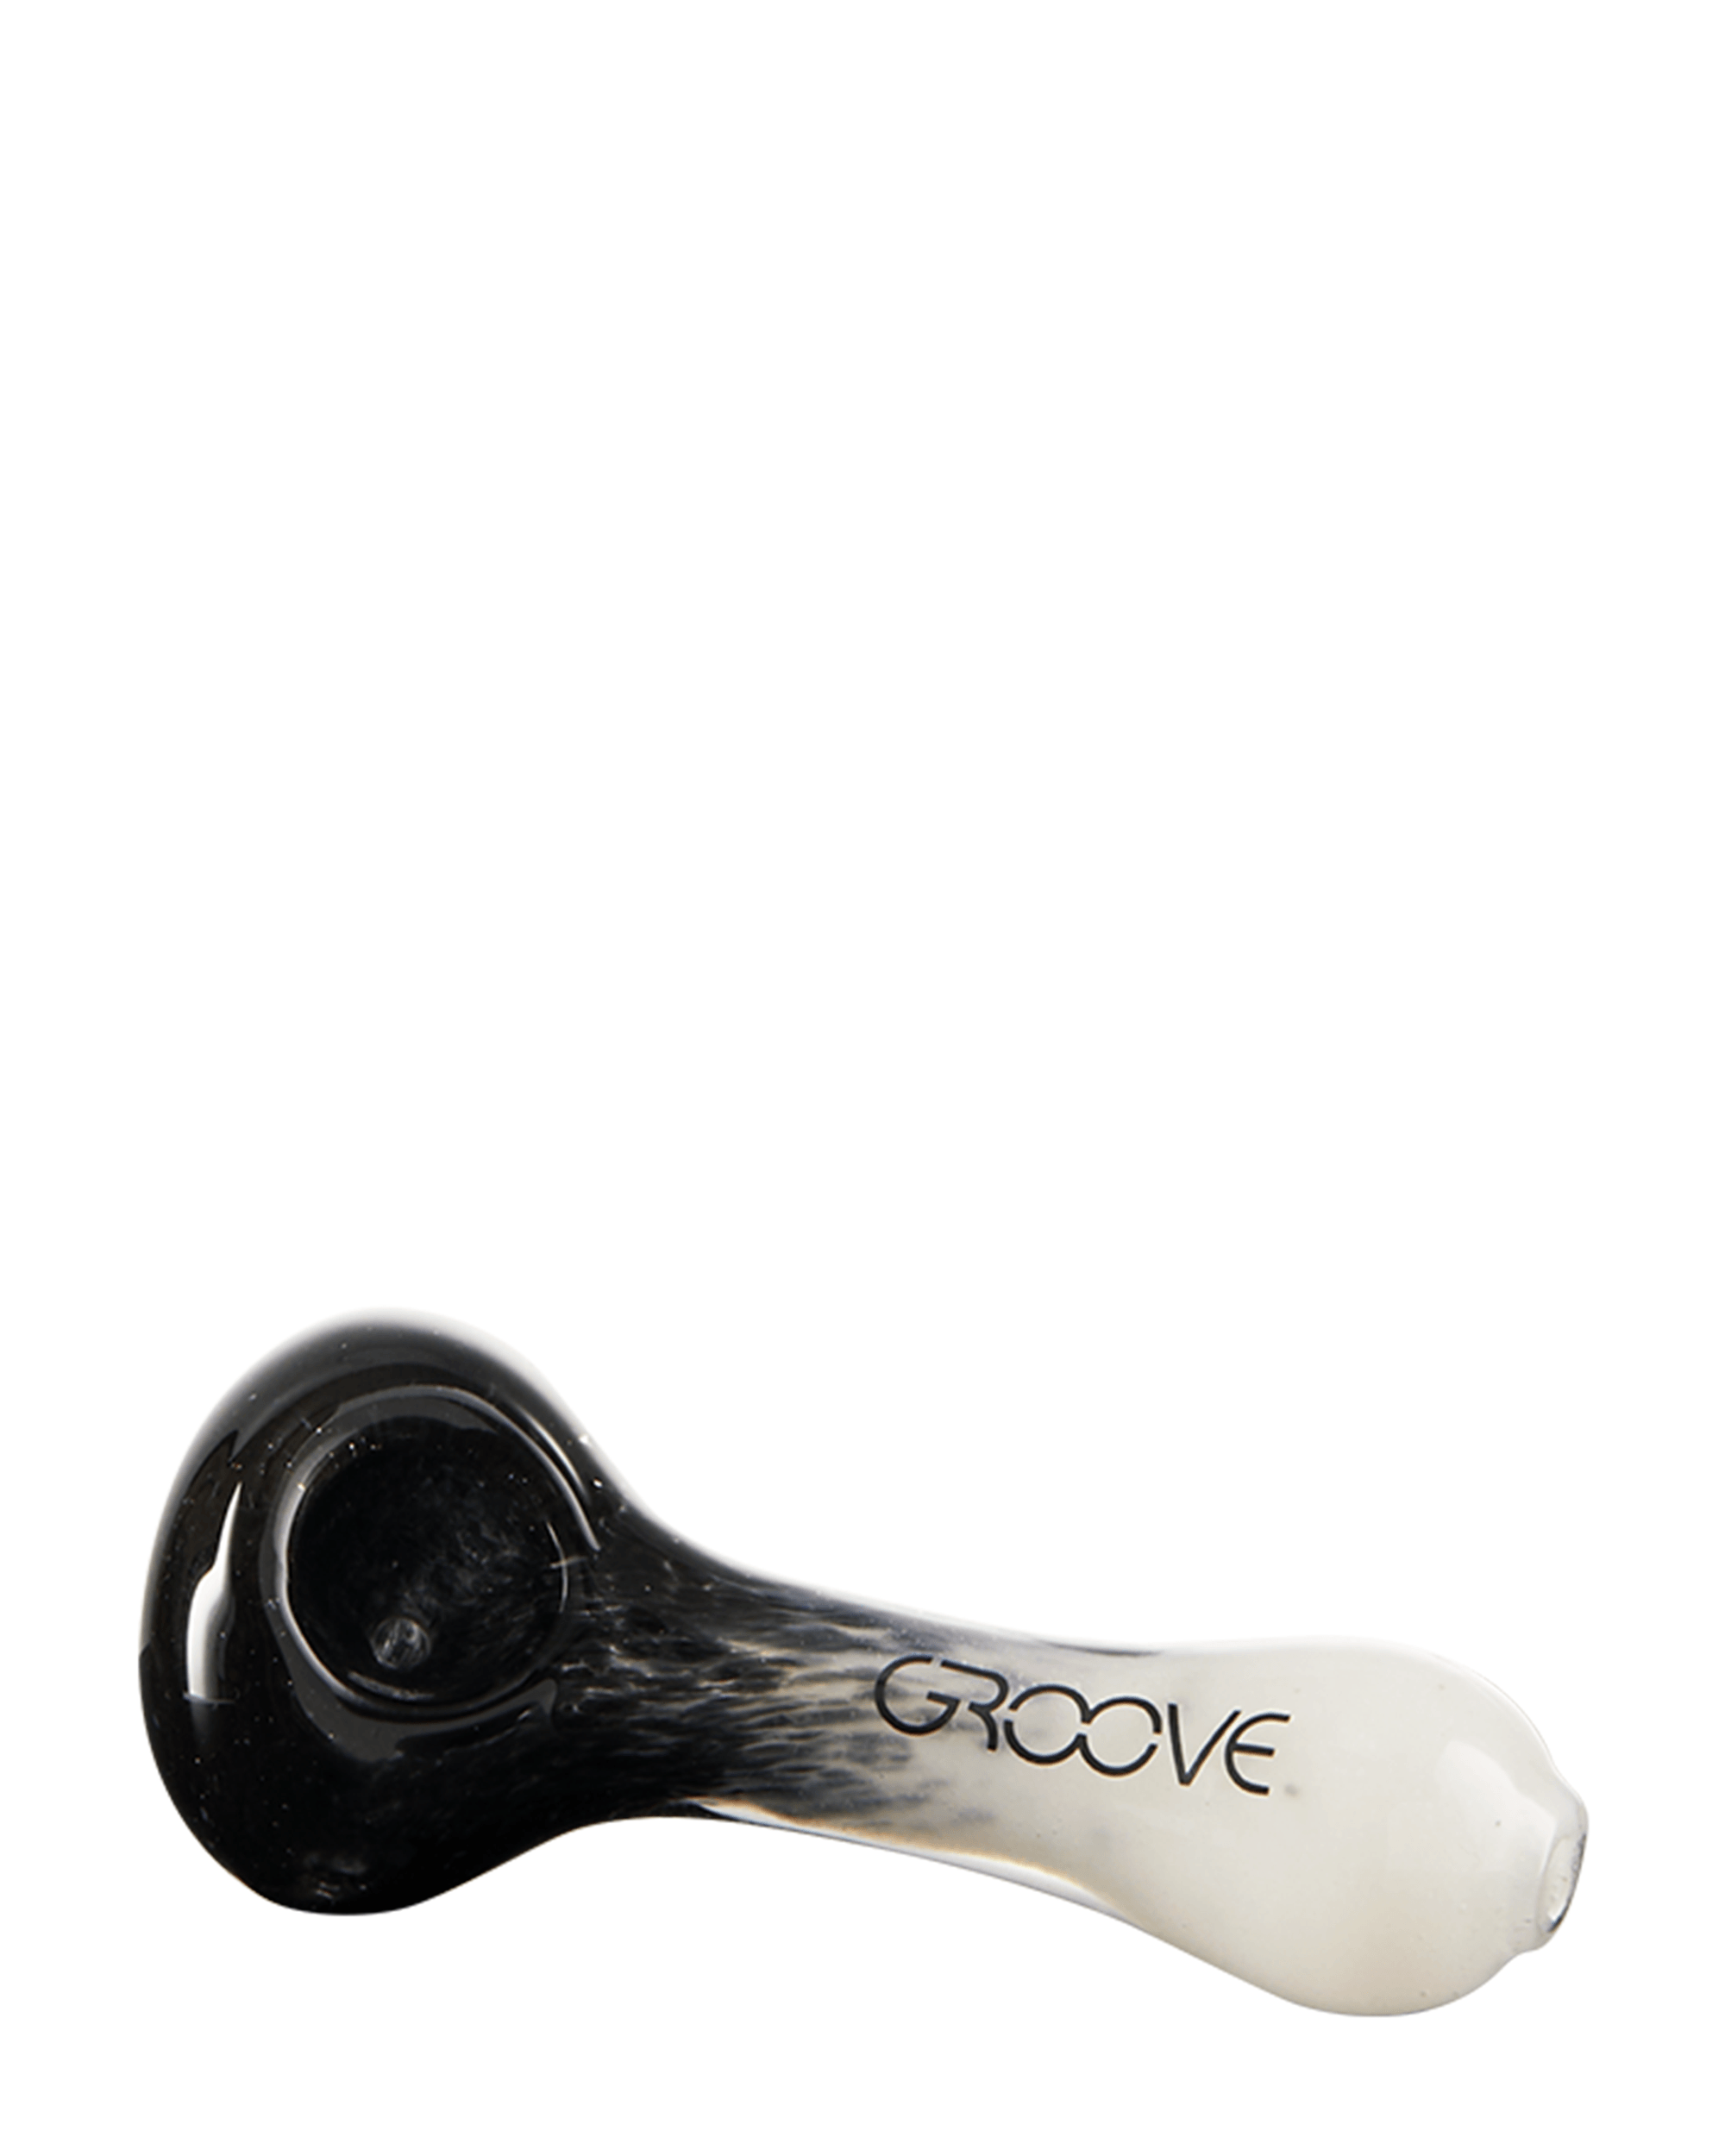 Groove | Fritted Spoon Hand Pipe w/ Black Accents | 4in Long - Glass - Clear - 2